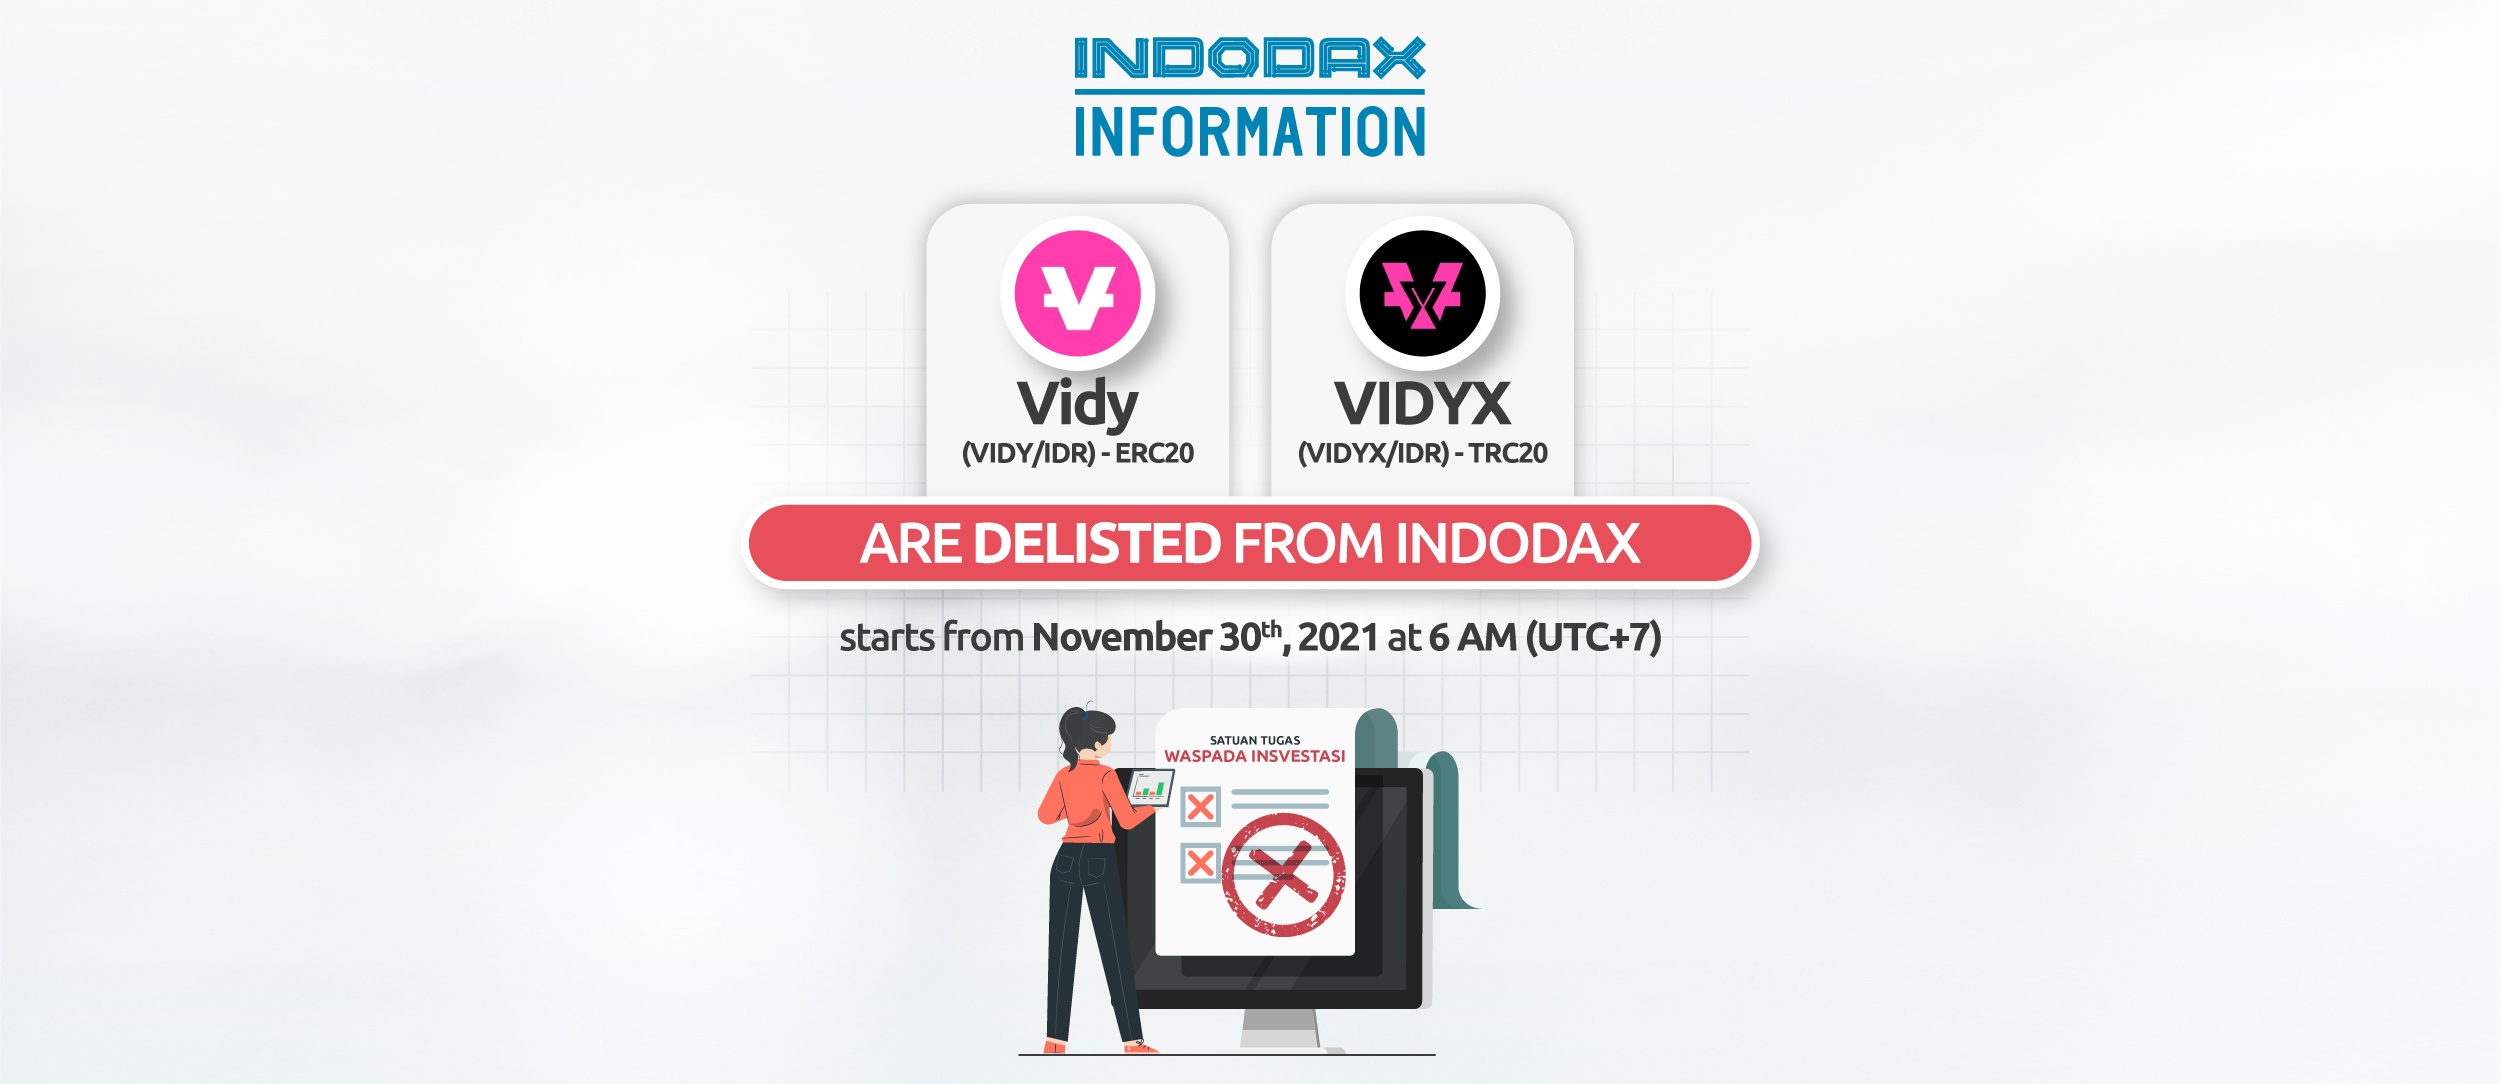 VIDY & VIDYX Are Delisted From Indodax